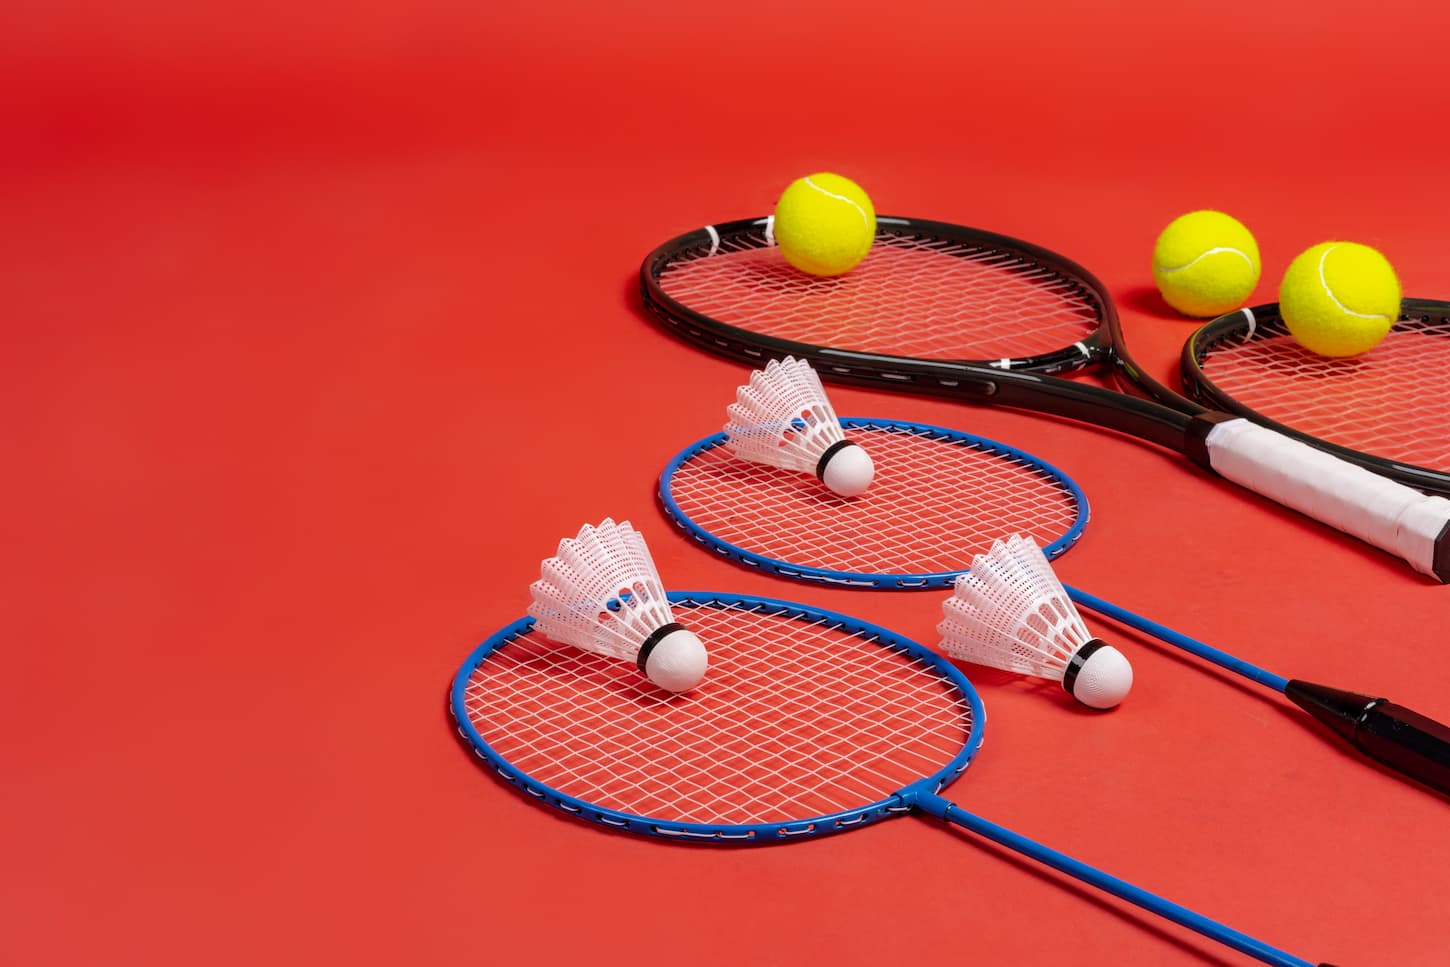 An image of rackets for tennis and for badminton on a red background.